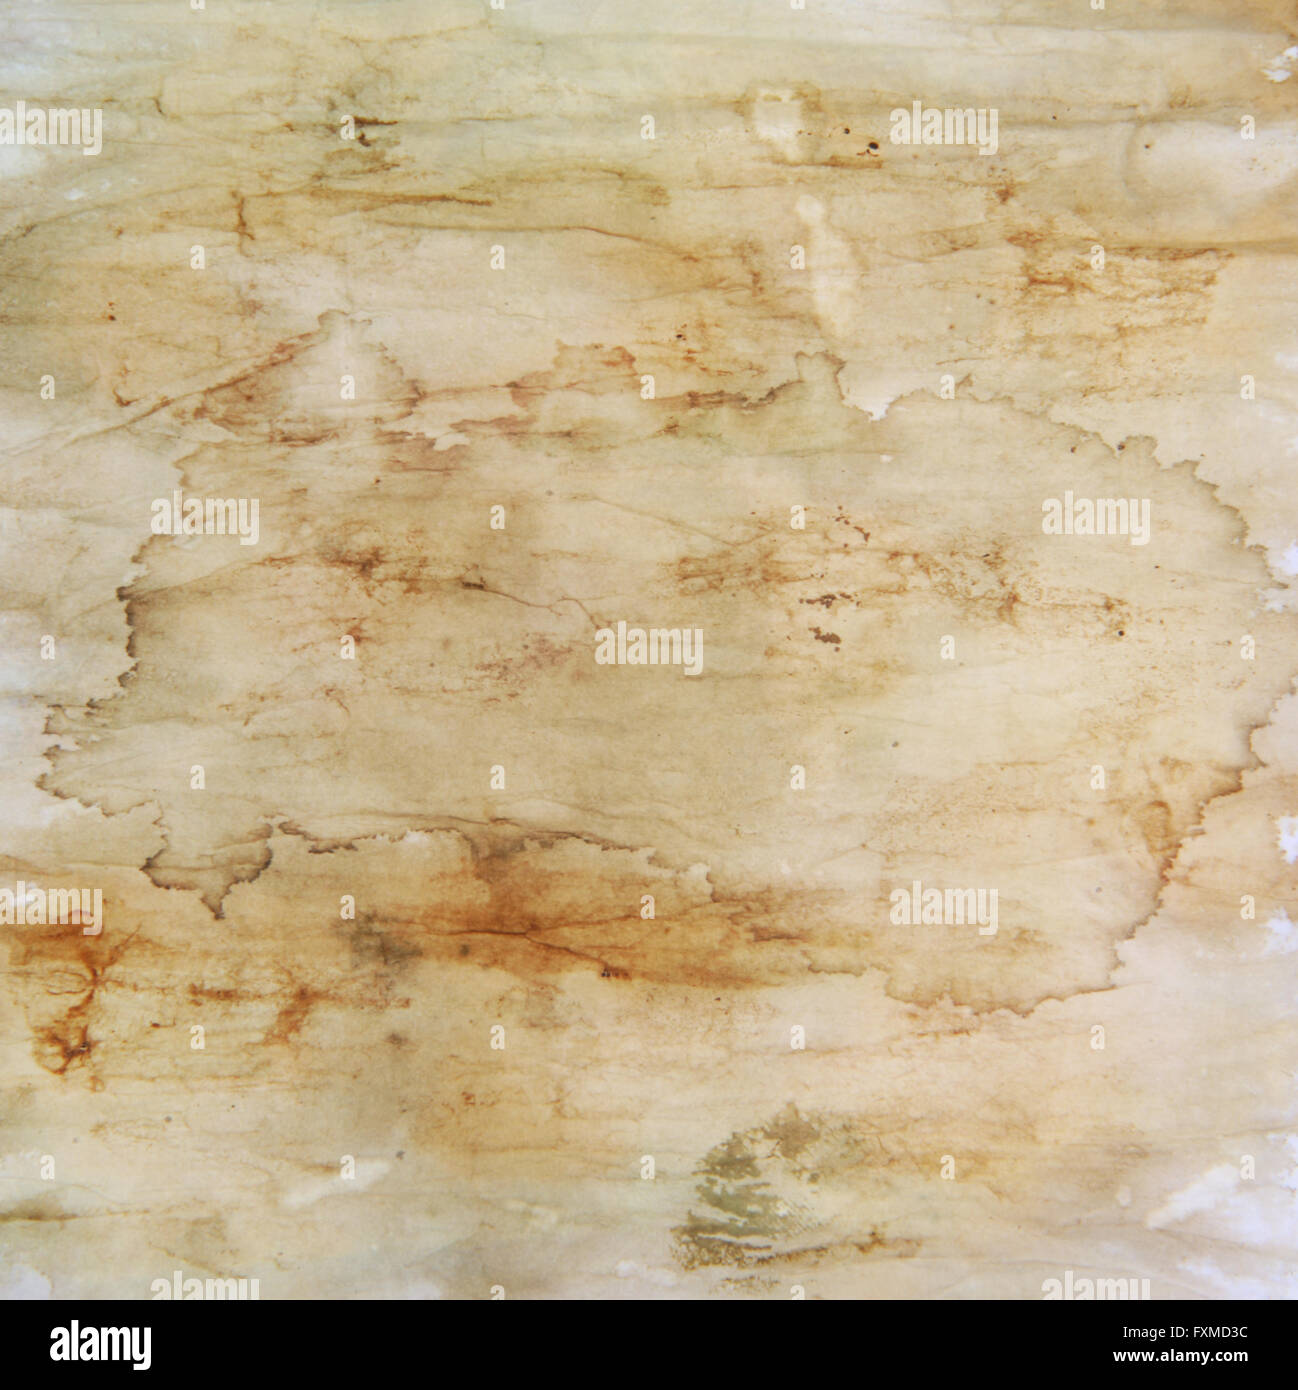 Designed Grunge Texture Old Painted Paper Background For